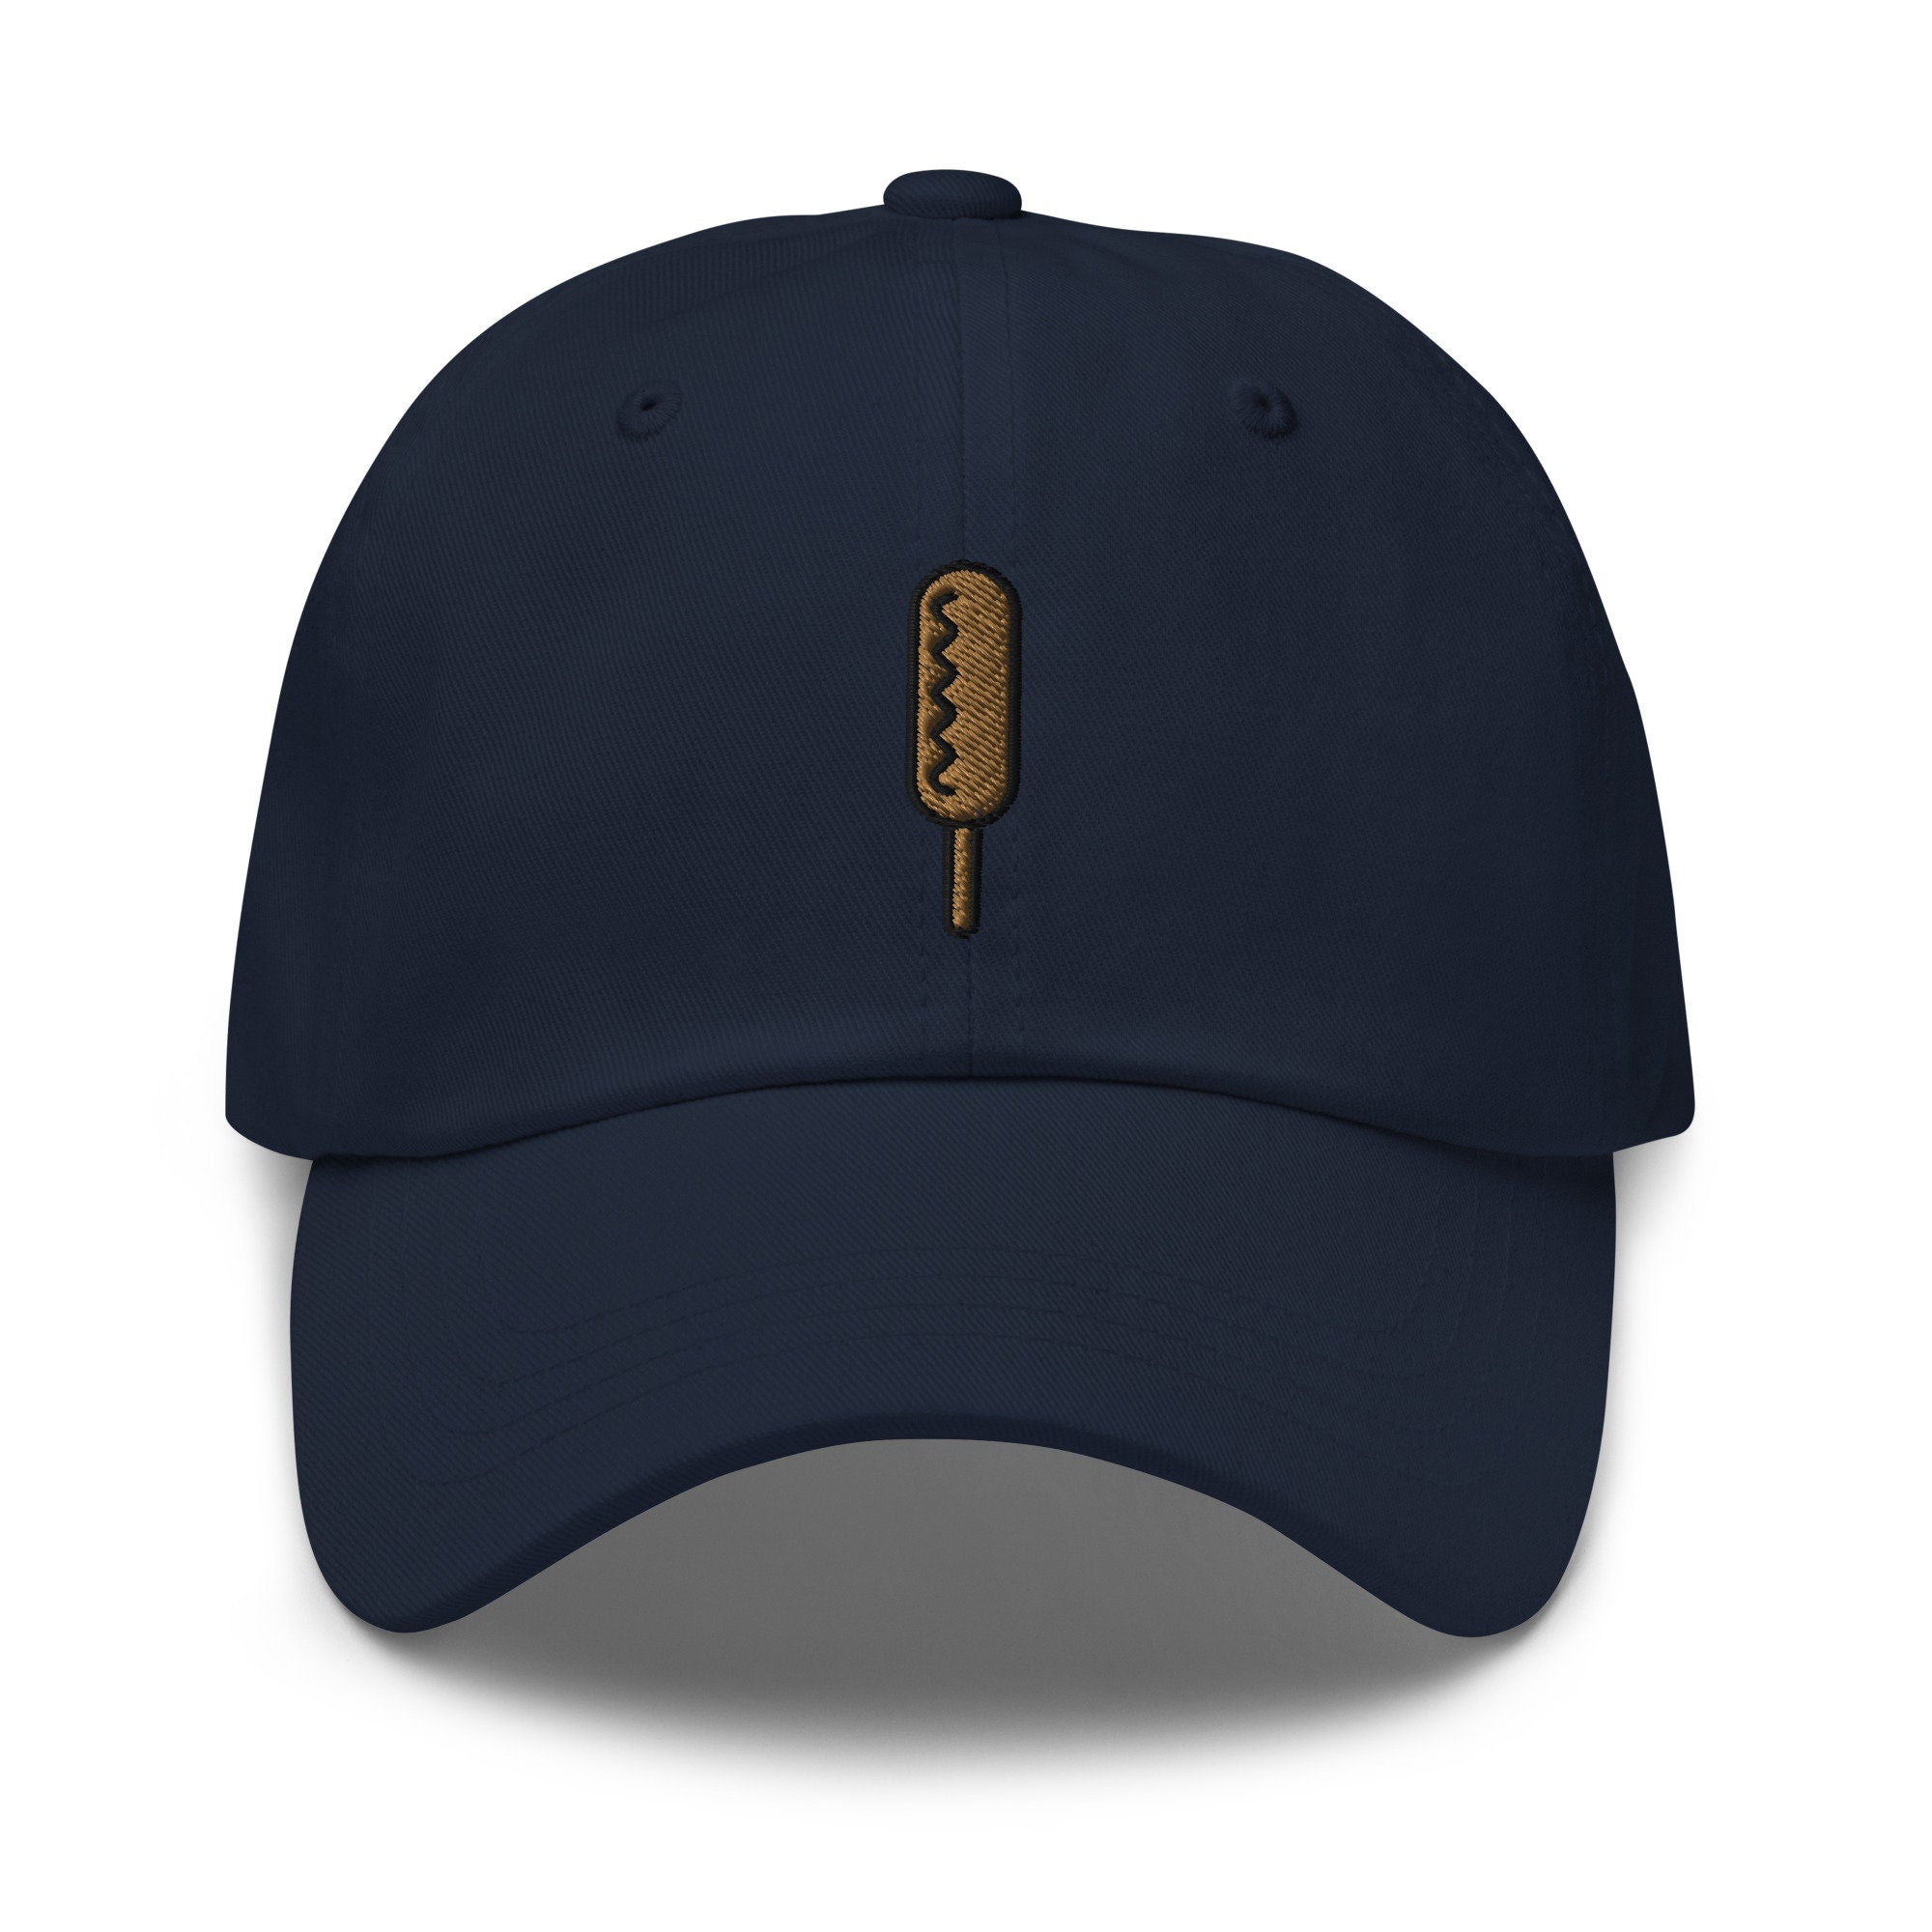 Corn Dog Embroidered Dad Hat